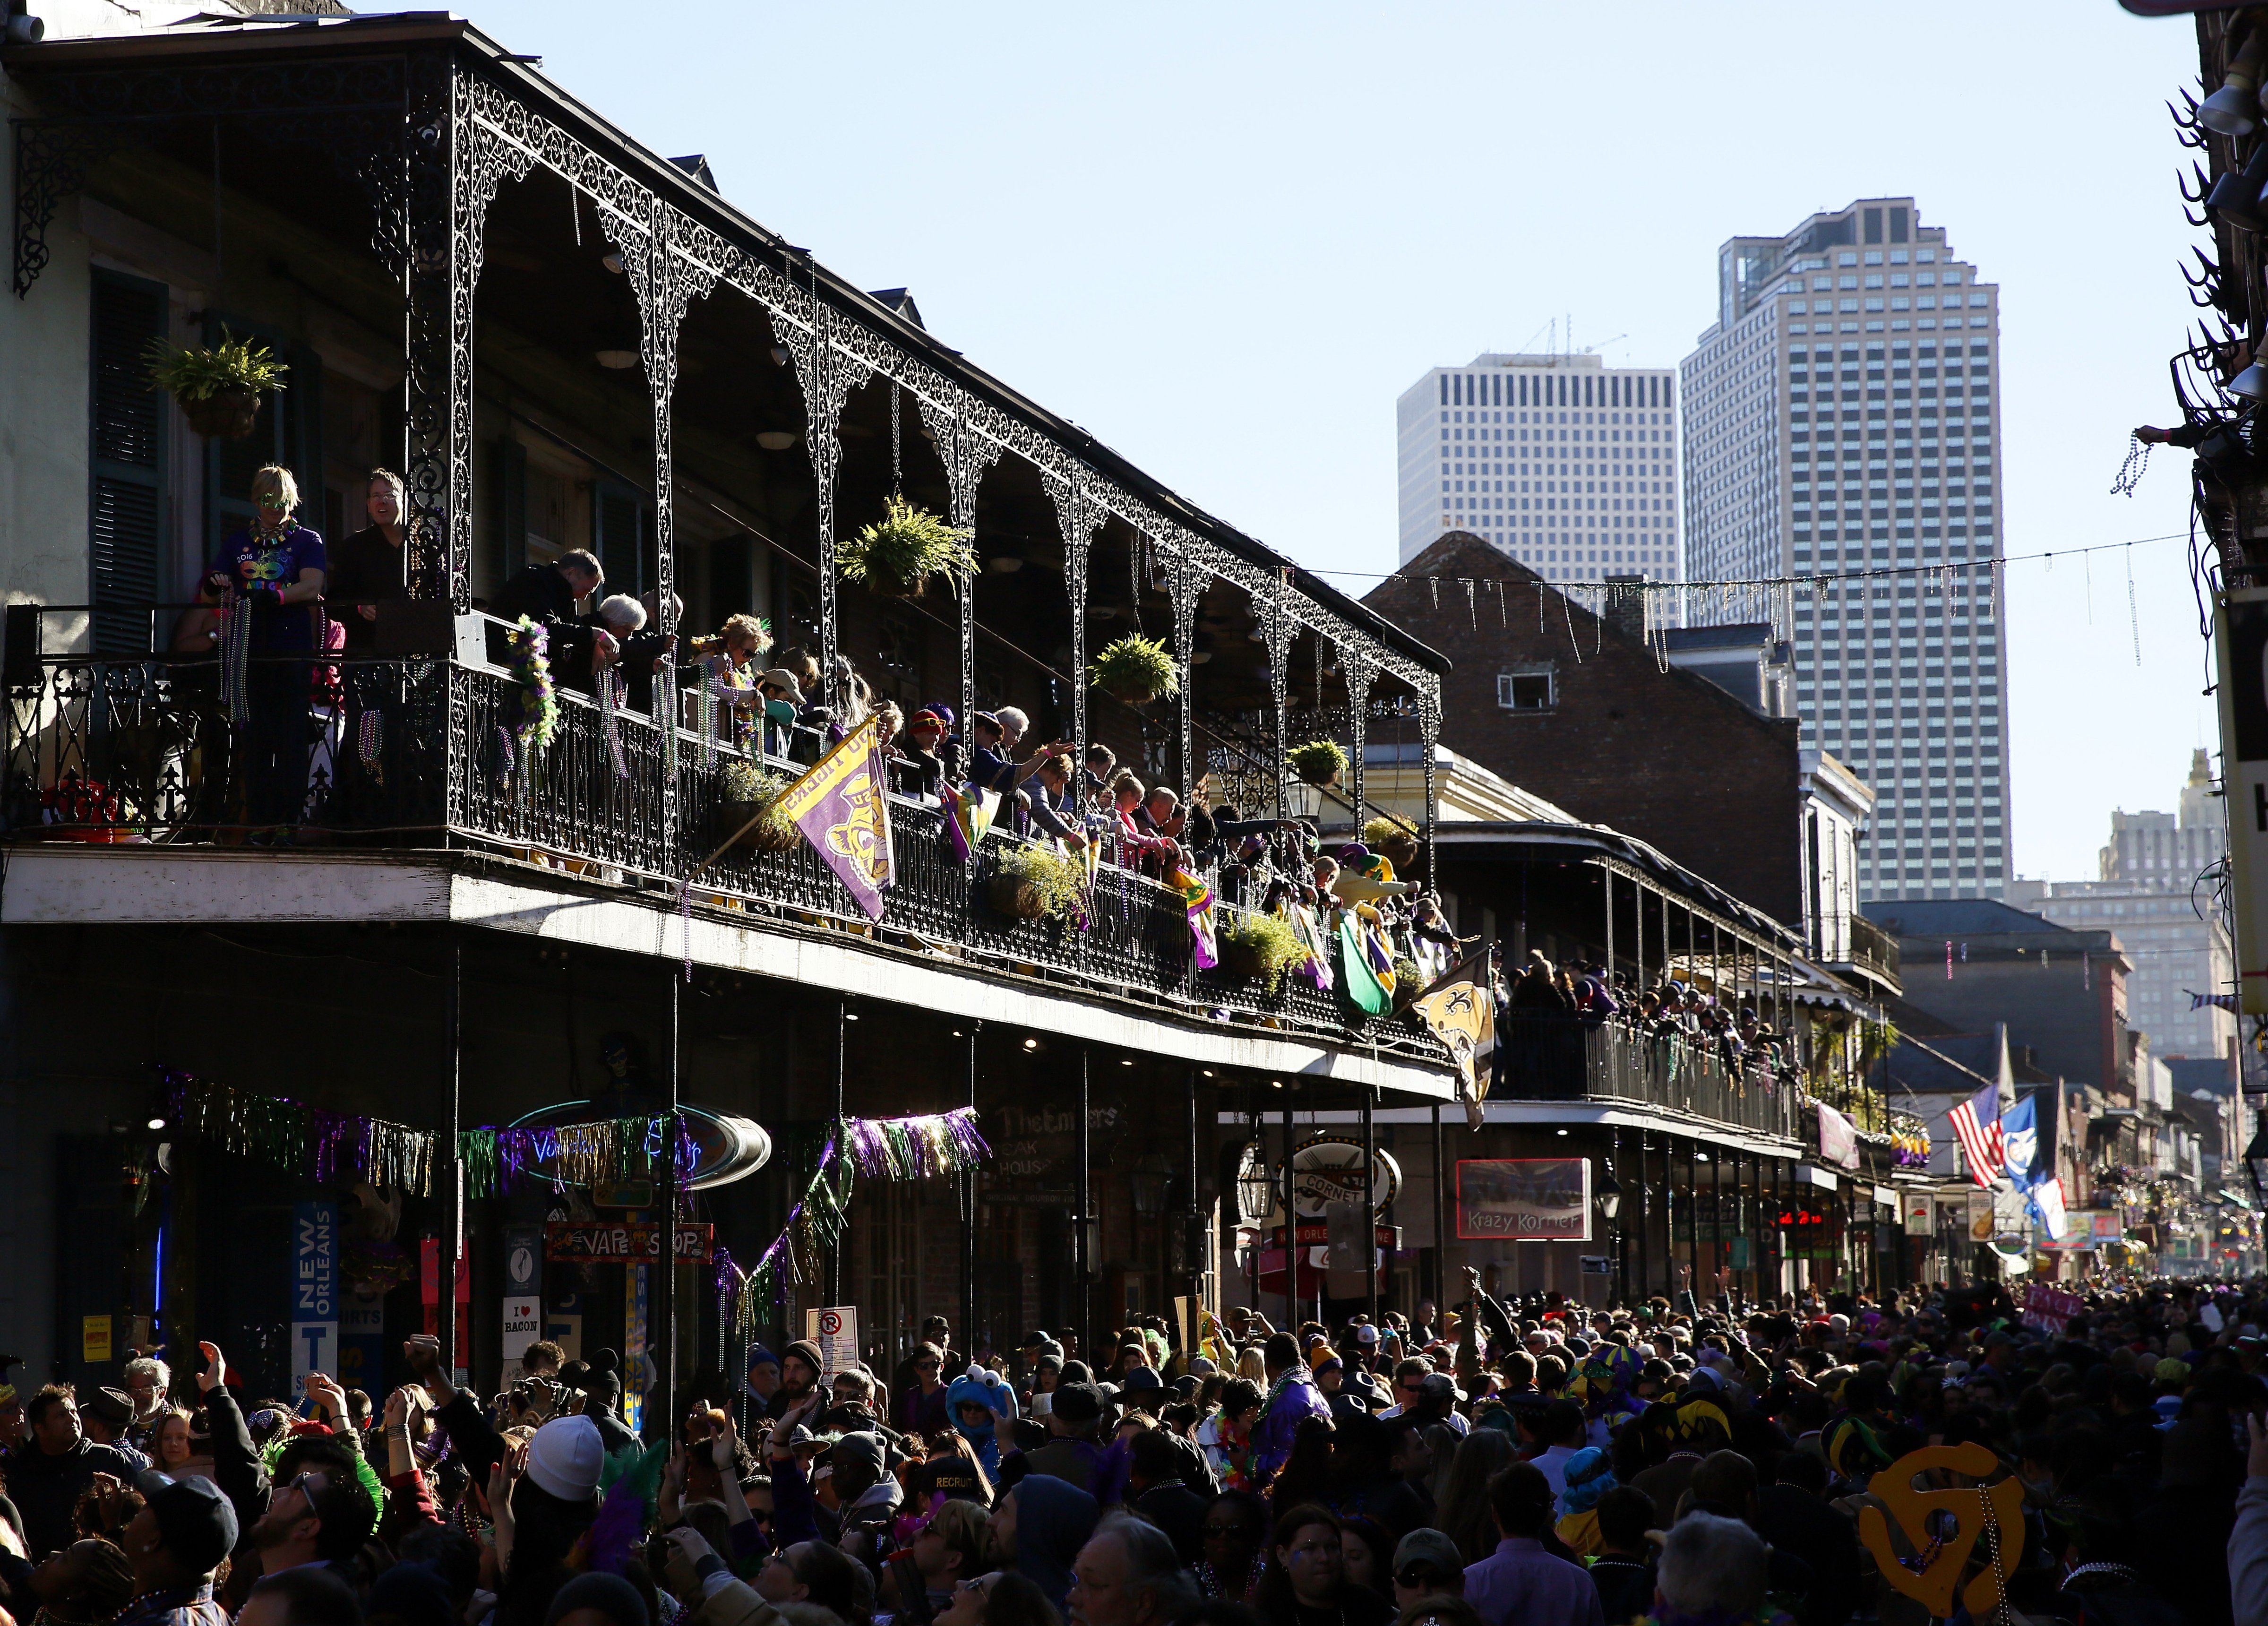 NEW ORLEANS, LOUISIANA - FEBRUARY 9, 2016:  Revelers pack Bourbon Street during Mardi Gras day on February 9, 2016 in New Orleans, Louisiana. Fat Tuesday, or Mardi Gras in French, is a celebration traditionally held before the observance of Ash Wednesday and the beginning of the Christian Lenten season. (Jonathan Bachman — Getty Images)